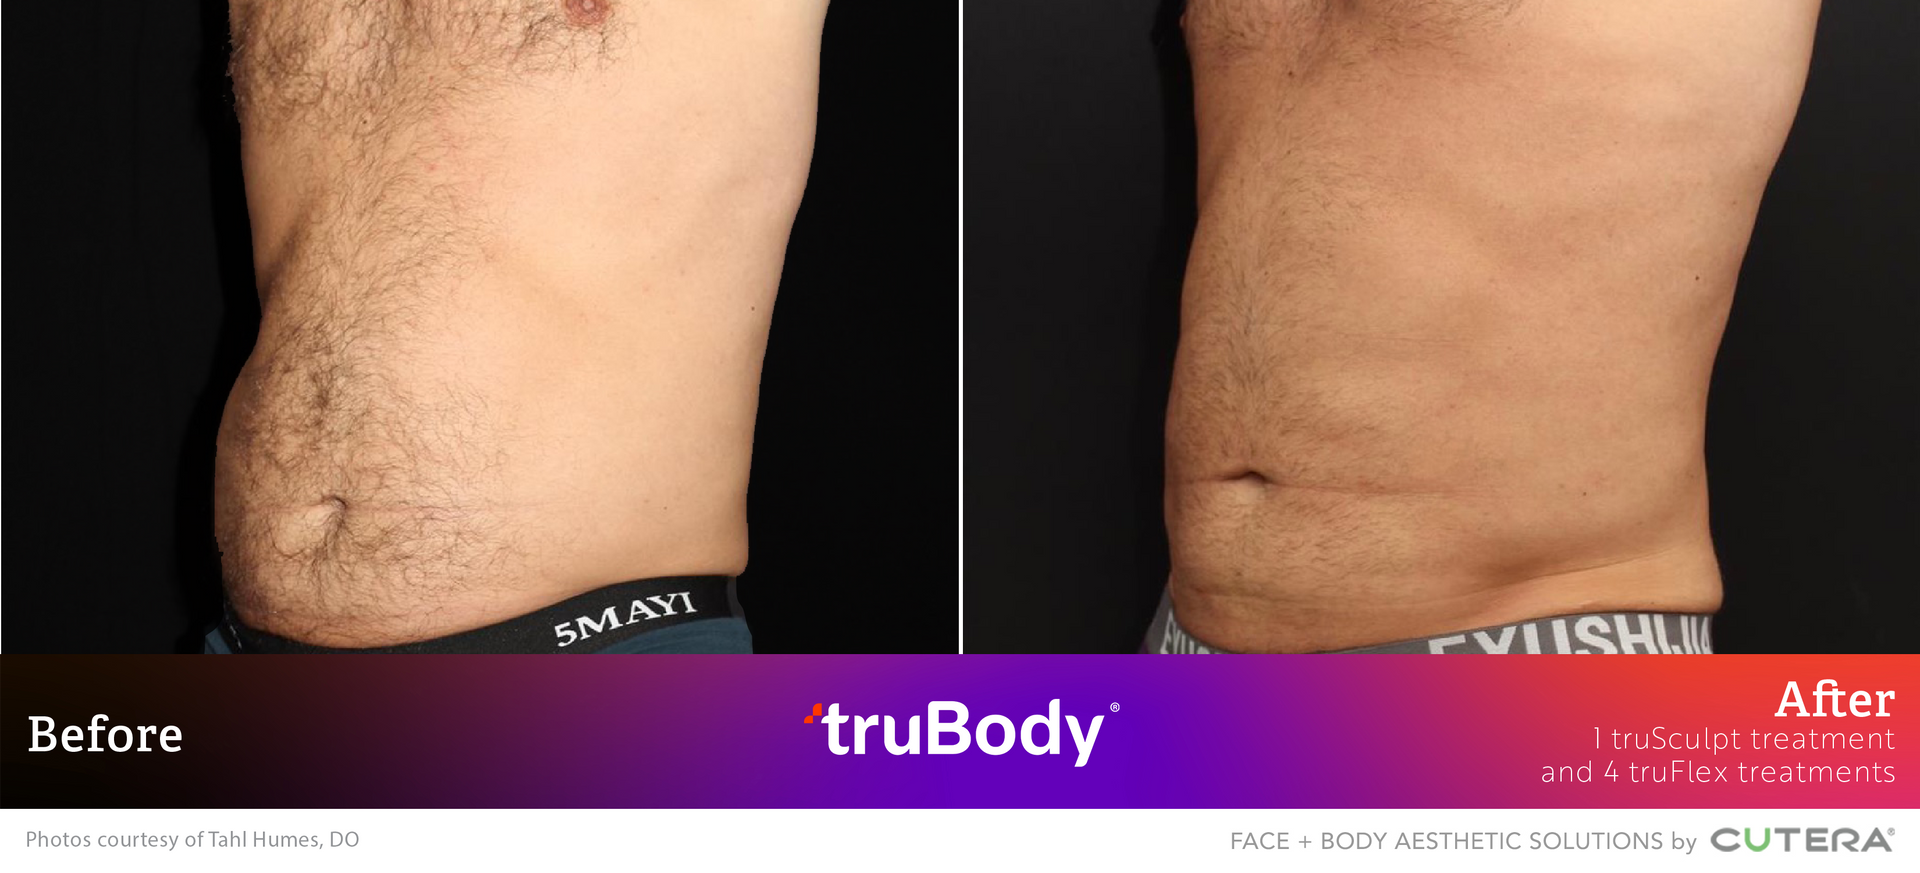 A before and after photo of a man 's stomach.